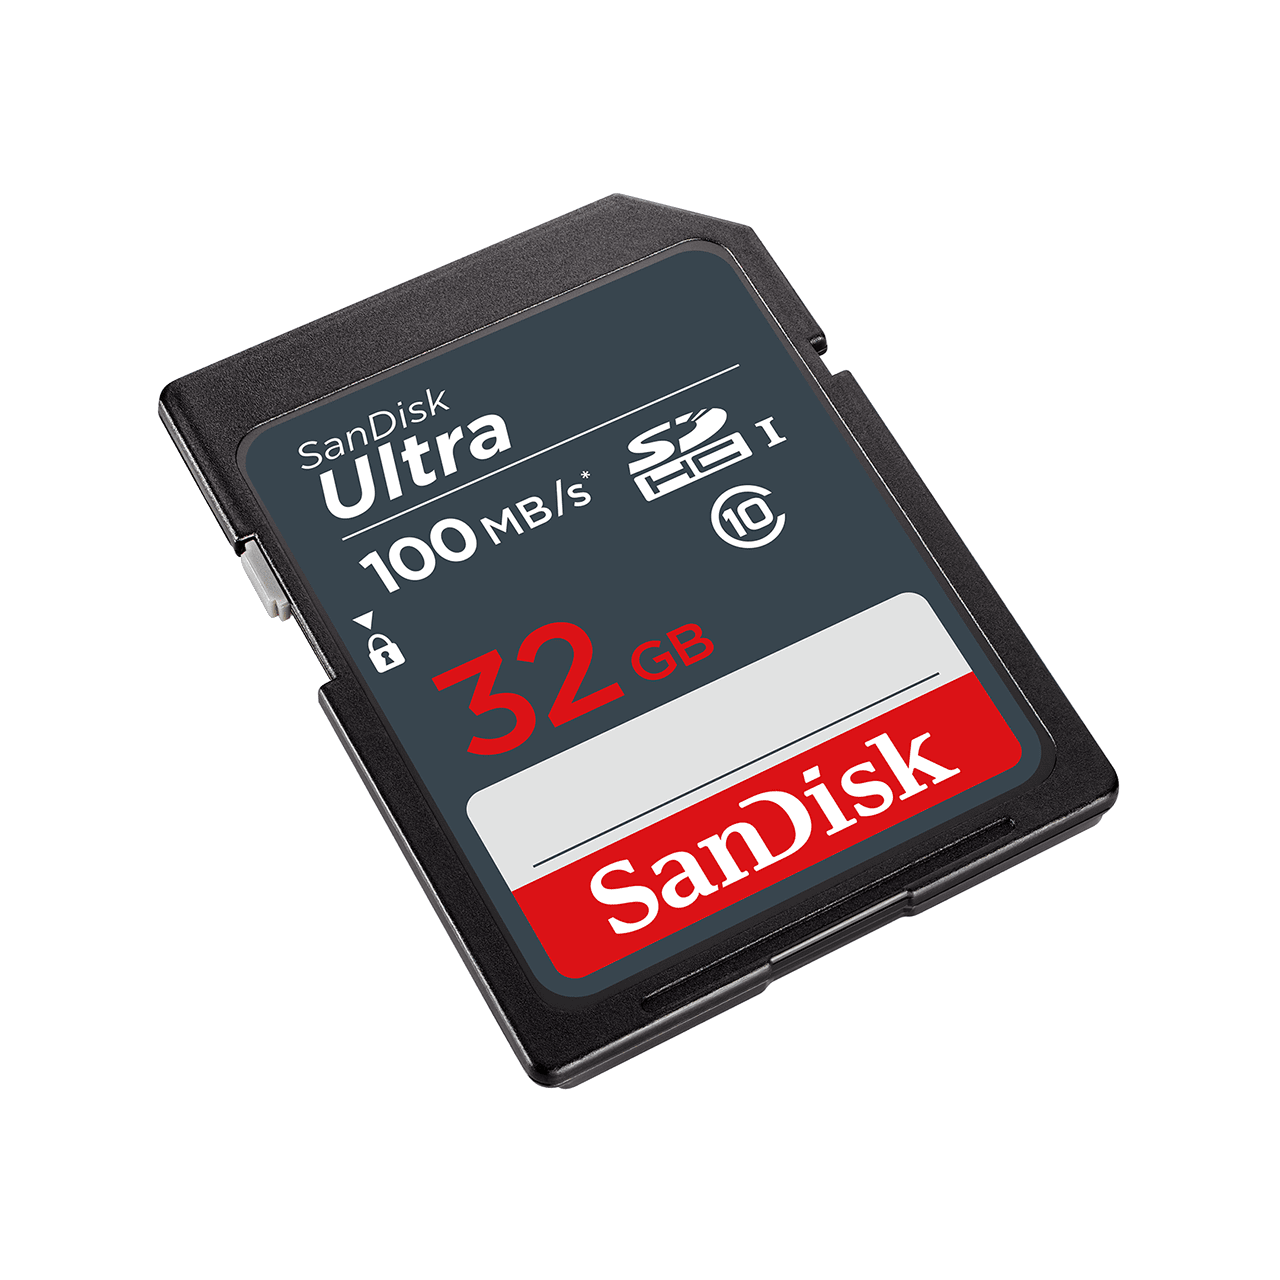  SanDisk MicroSD 256GB Ultra Memory Card Works with